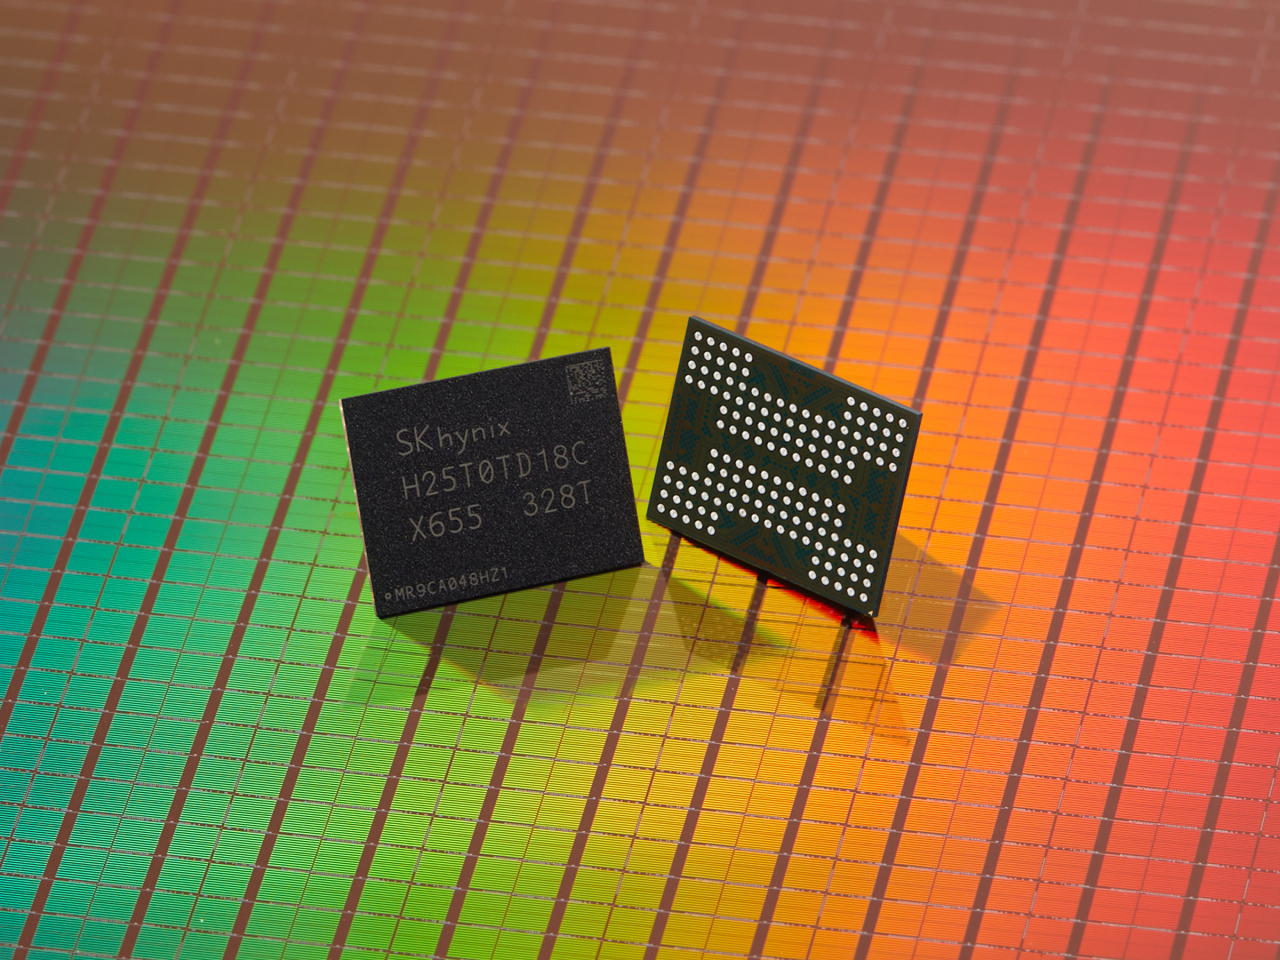 SK hynix unveils world's first 321-layer NAND